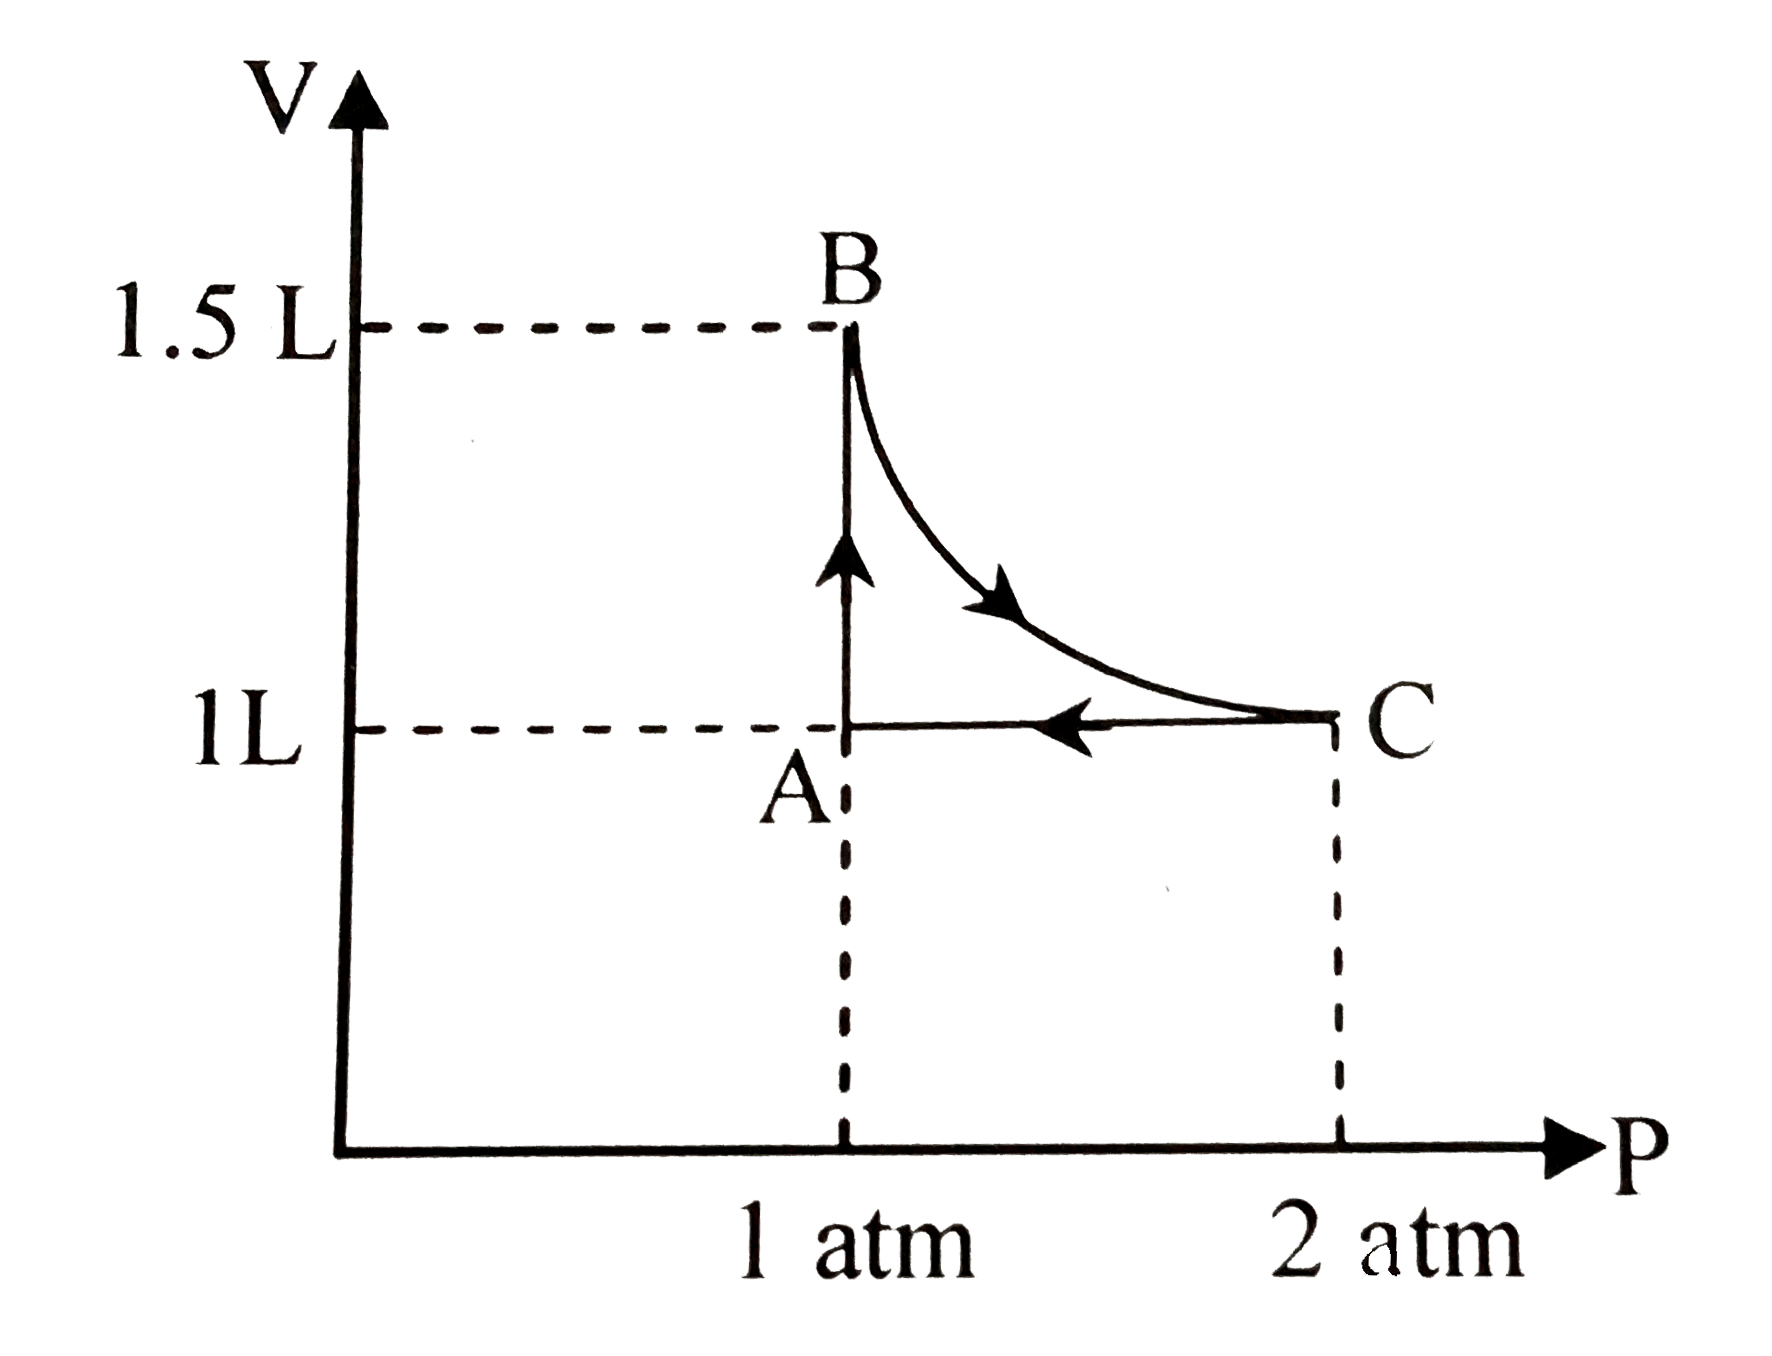 A system consisting of 1 mol of an ideal gas undergoes a reversible process, A to B to C to A (schematically indicated in the figure below). If the temperature at the starting point A is 300 K and the work done in the process B to C  is 1 L atm, the heat exchanged in the entire process is L atm is